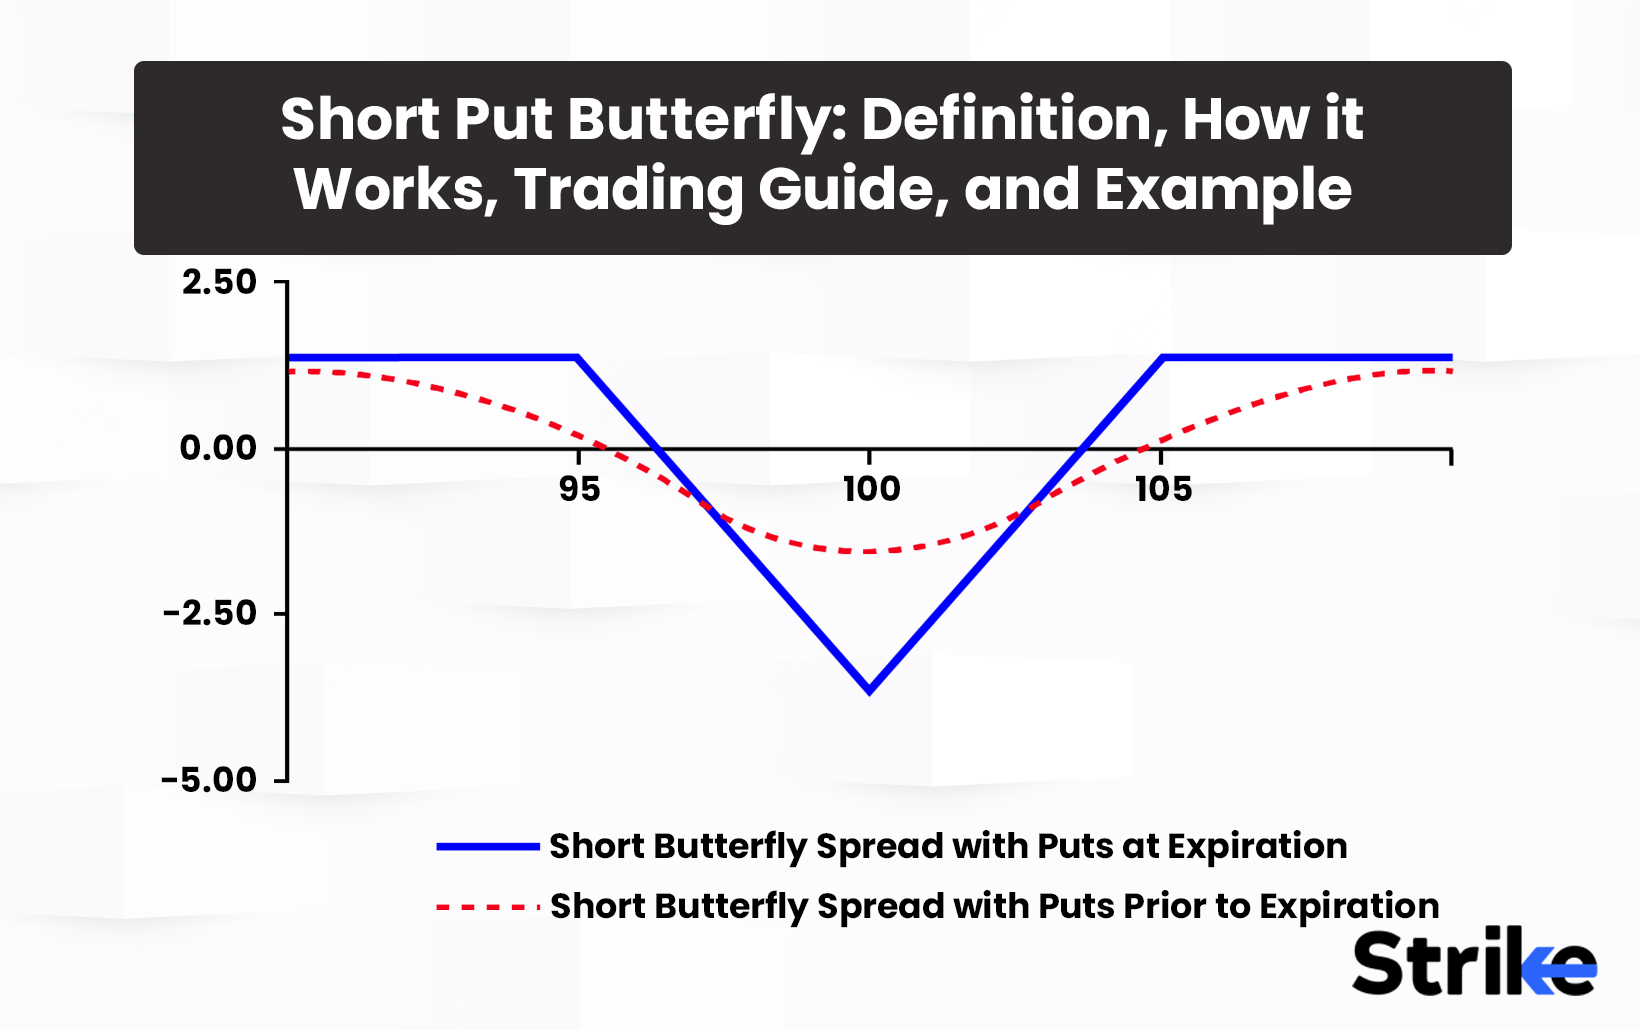 Short Put Butterfly: Definition, How it Works, Trading Guide, and Example